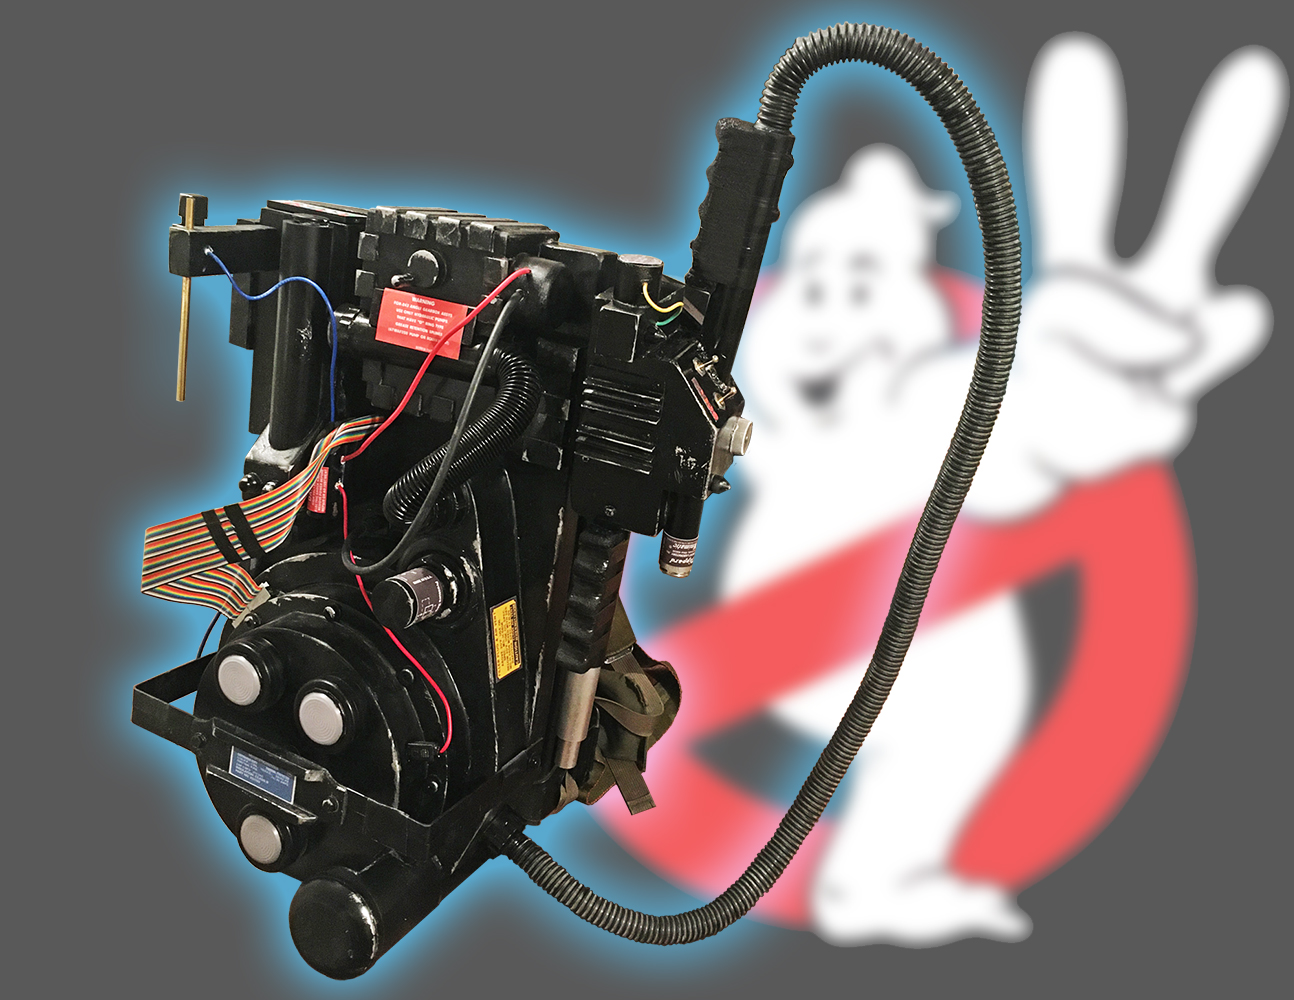 Ghostbusters Proton pack